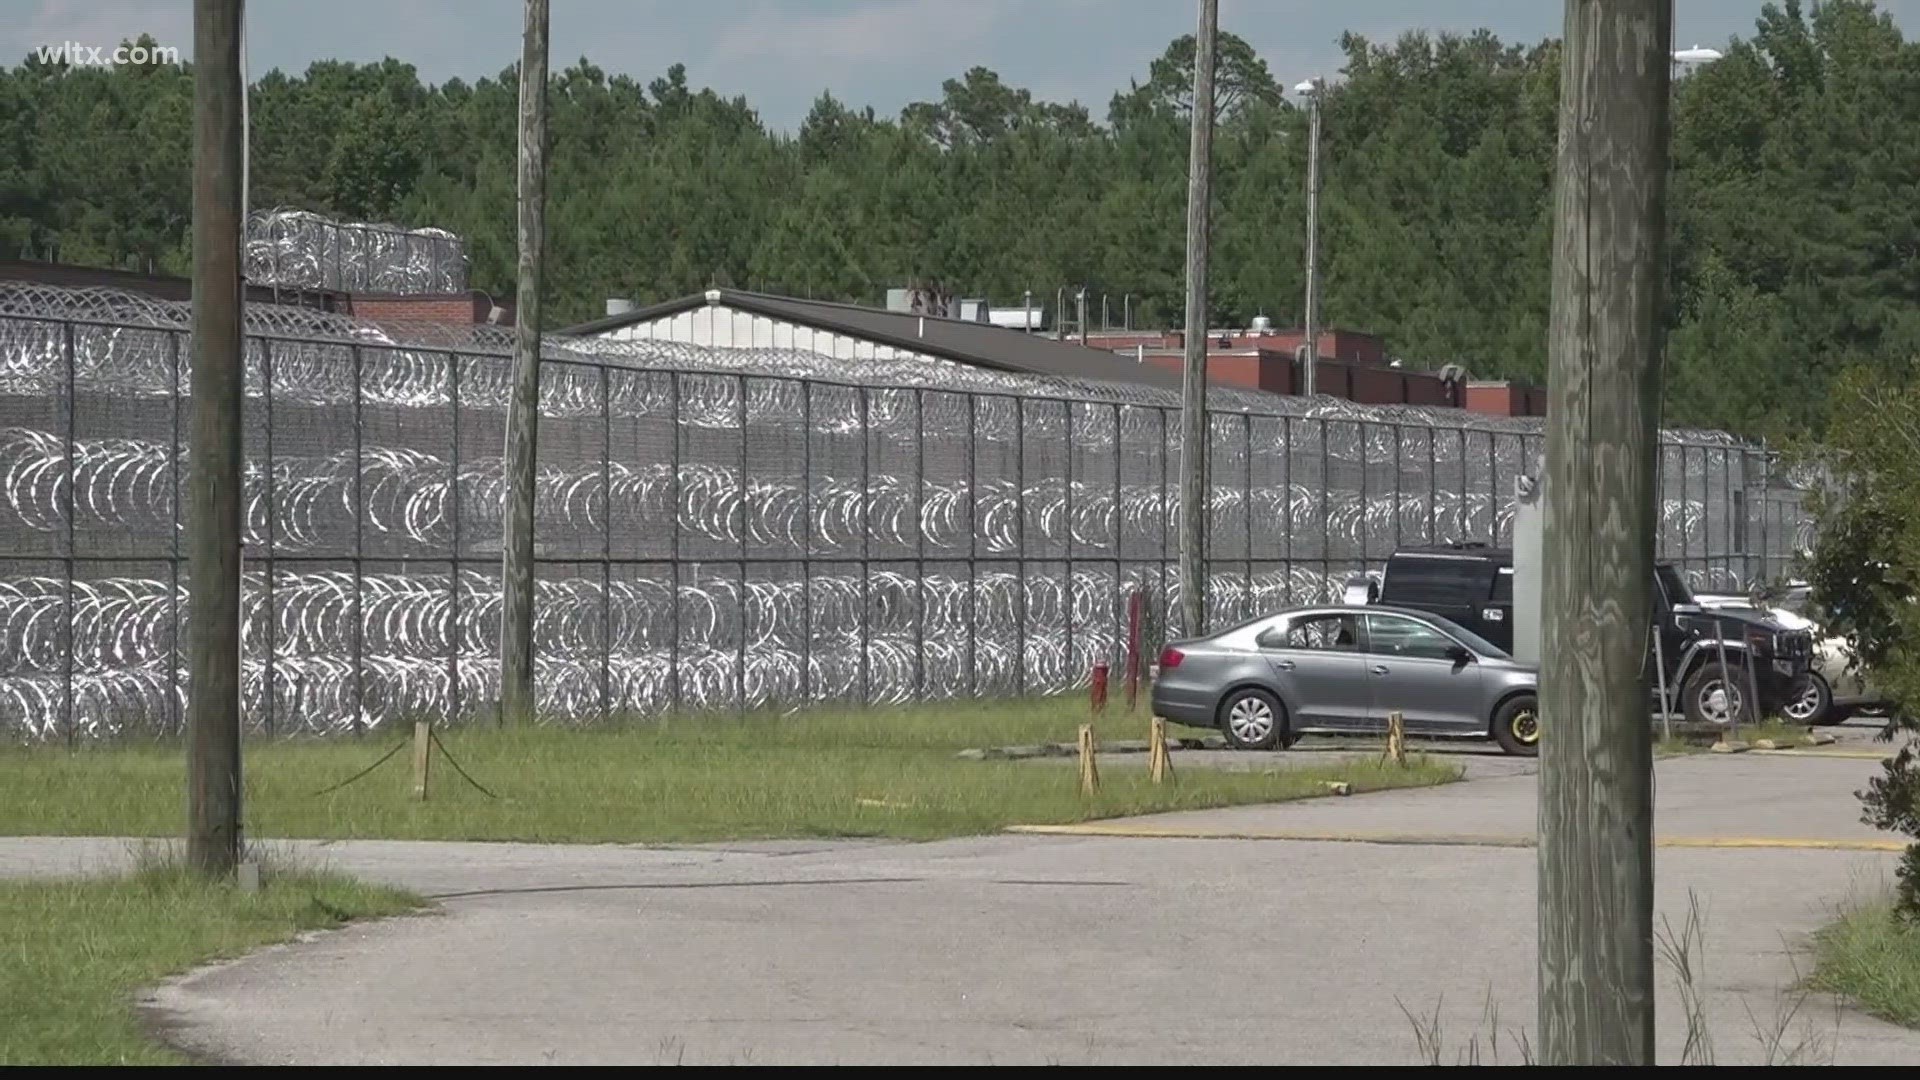 The 38-year-old escapee got out through a hole in the fence at the detention center.